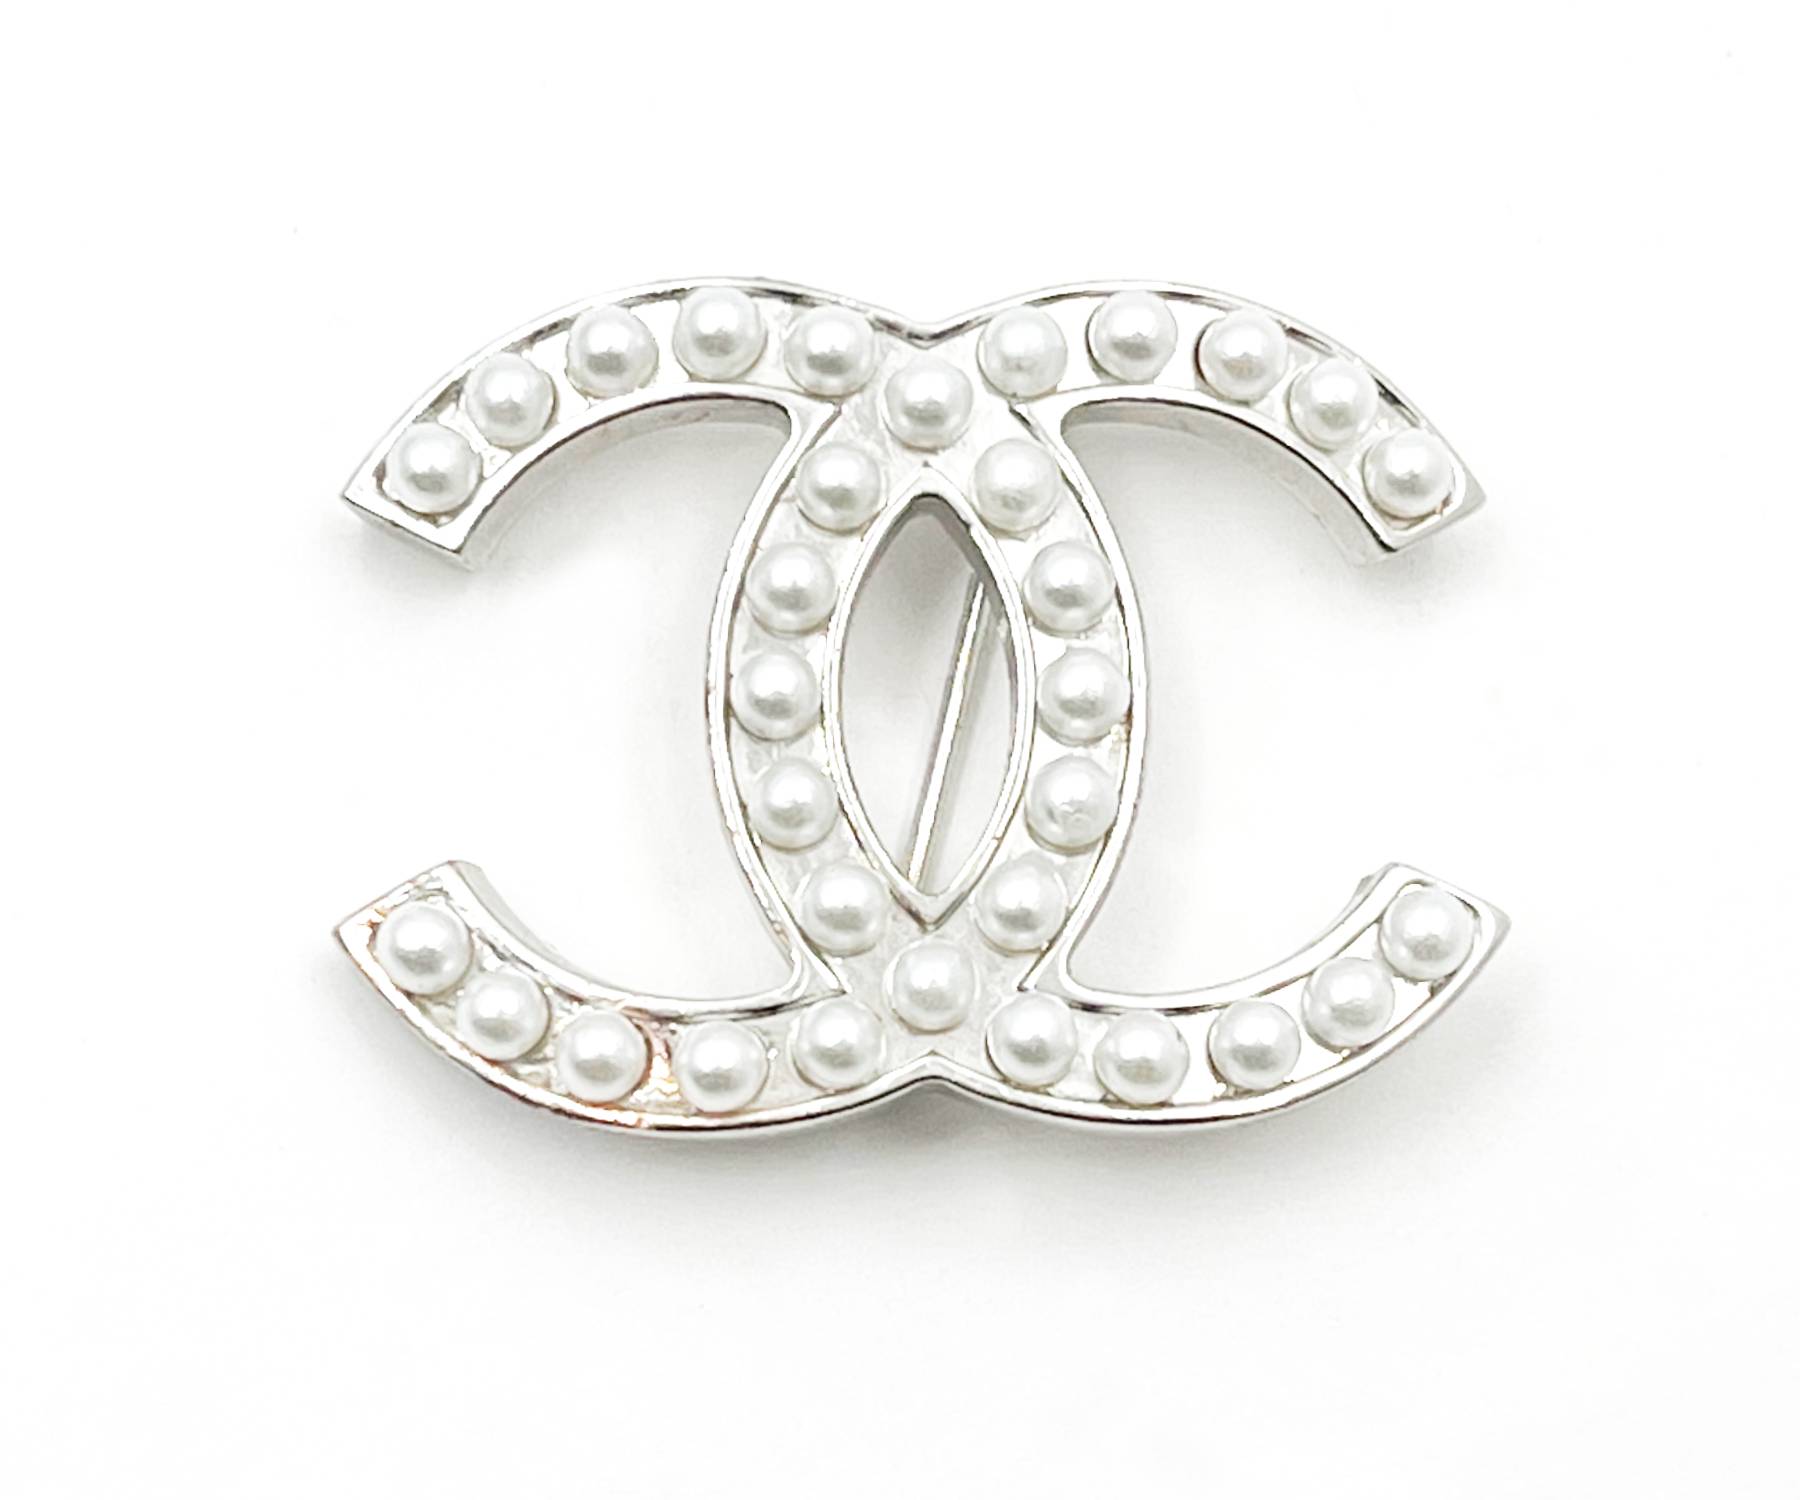 Vintage CHANEL golden heart brooch with CC mark. Cute jewelry